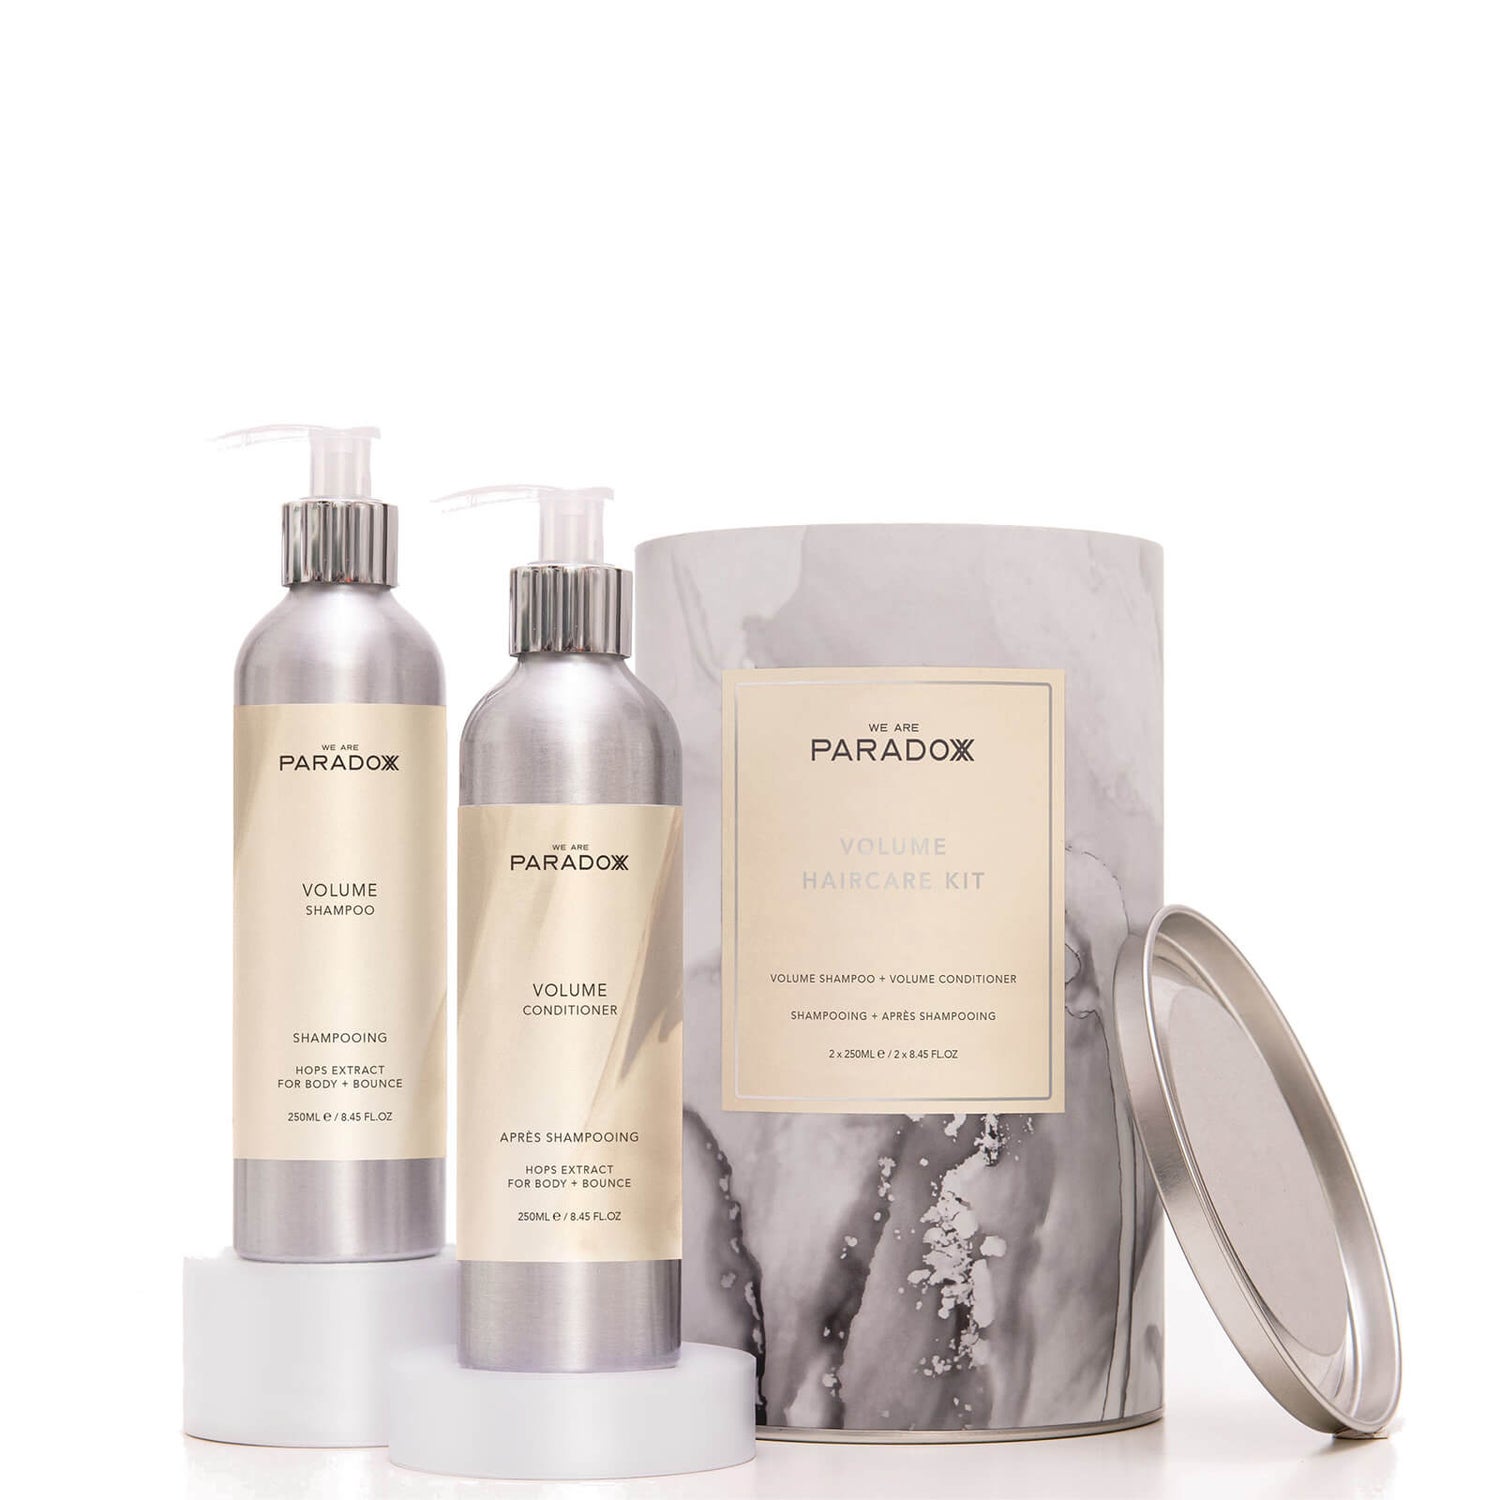 We Are Paradoxx Volume Haircare Kit (Worth £38.00)